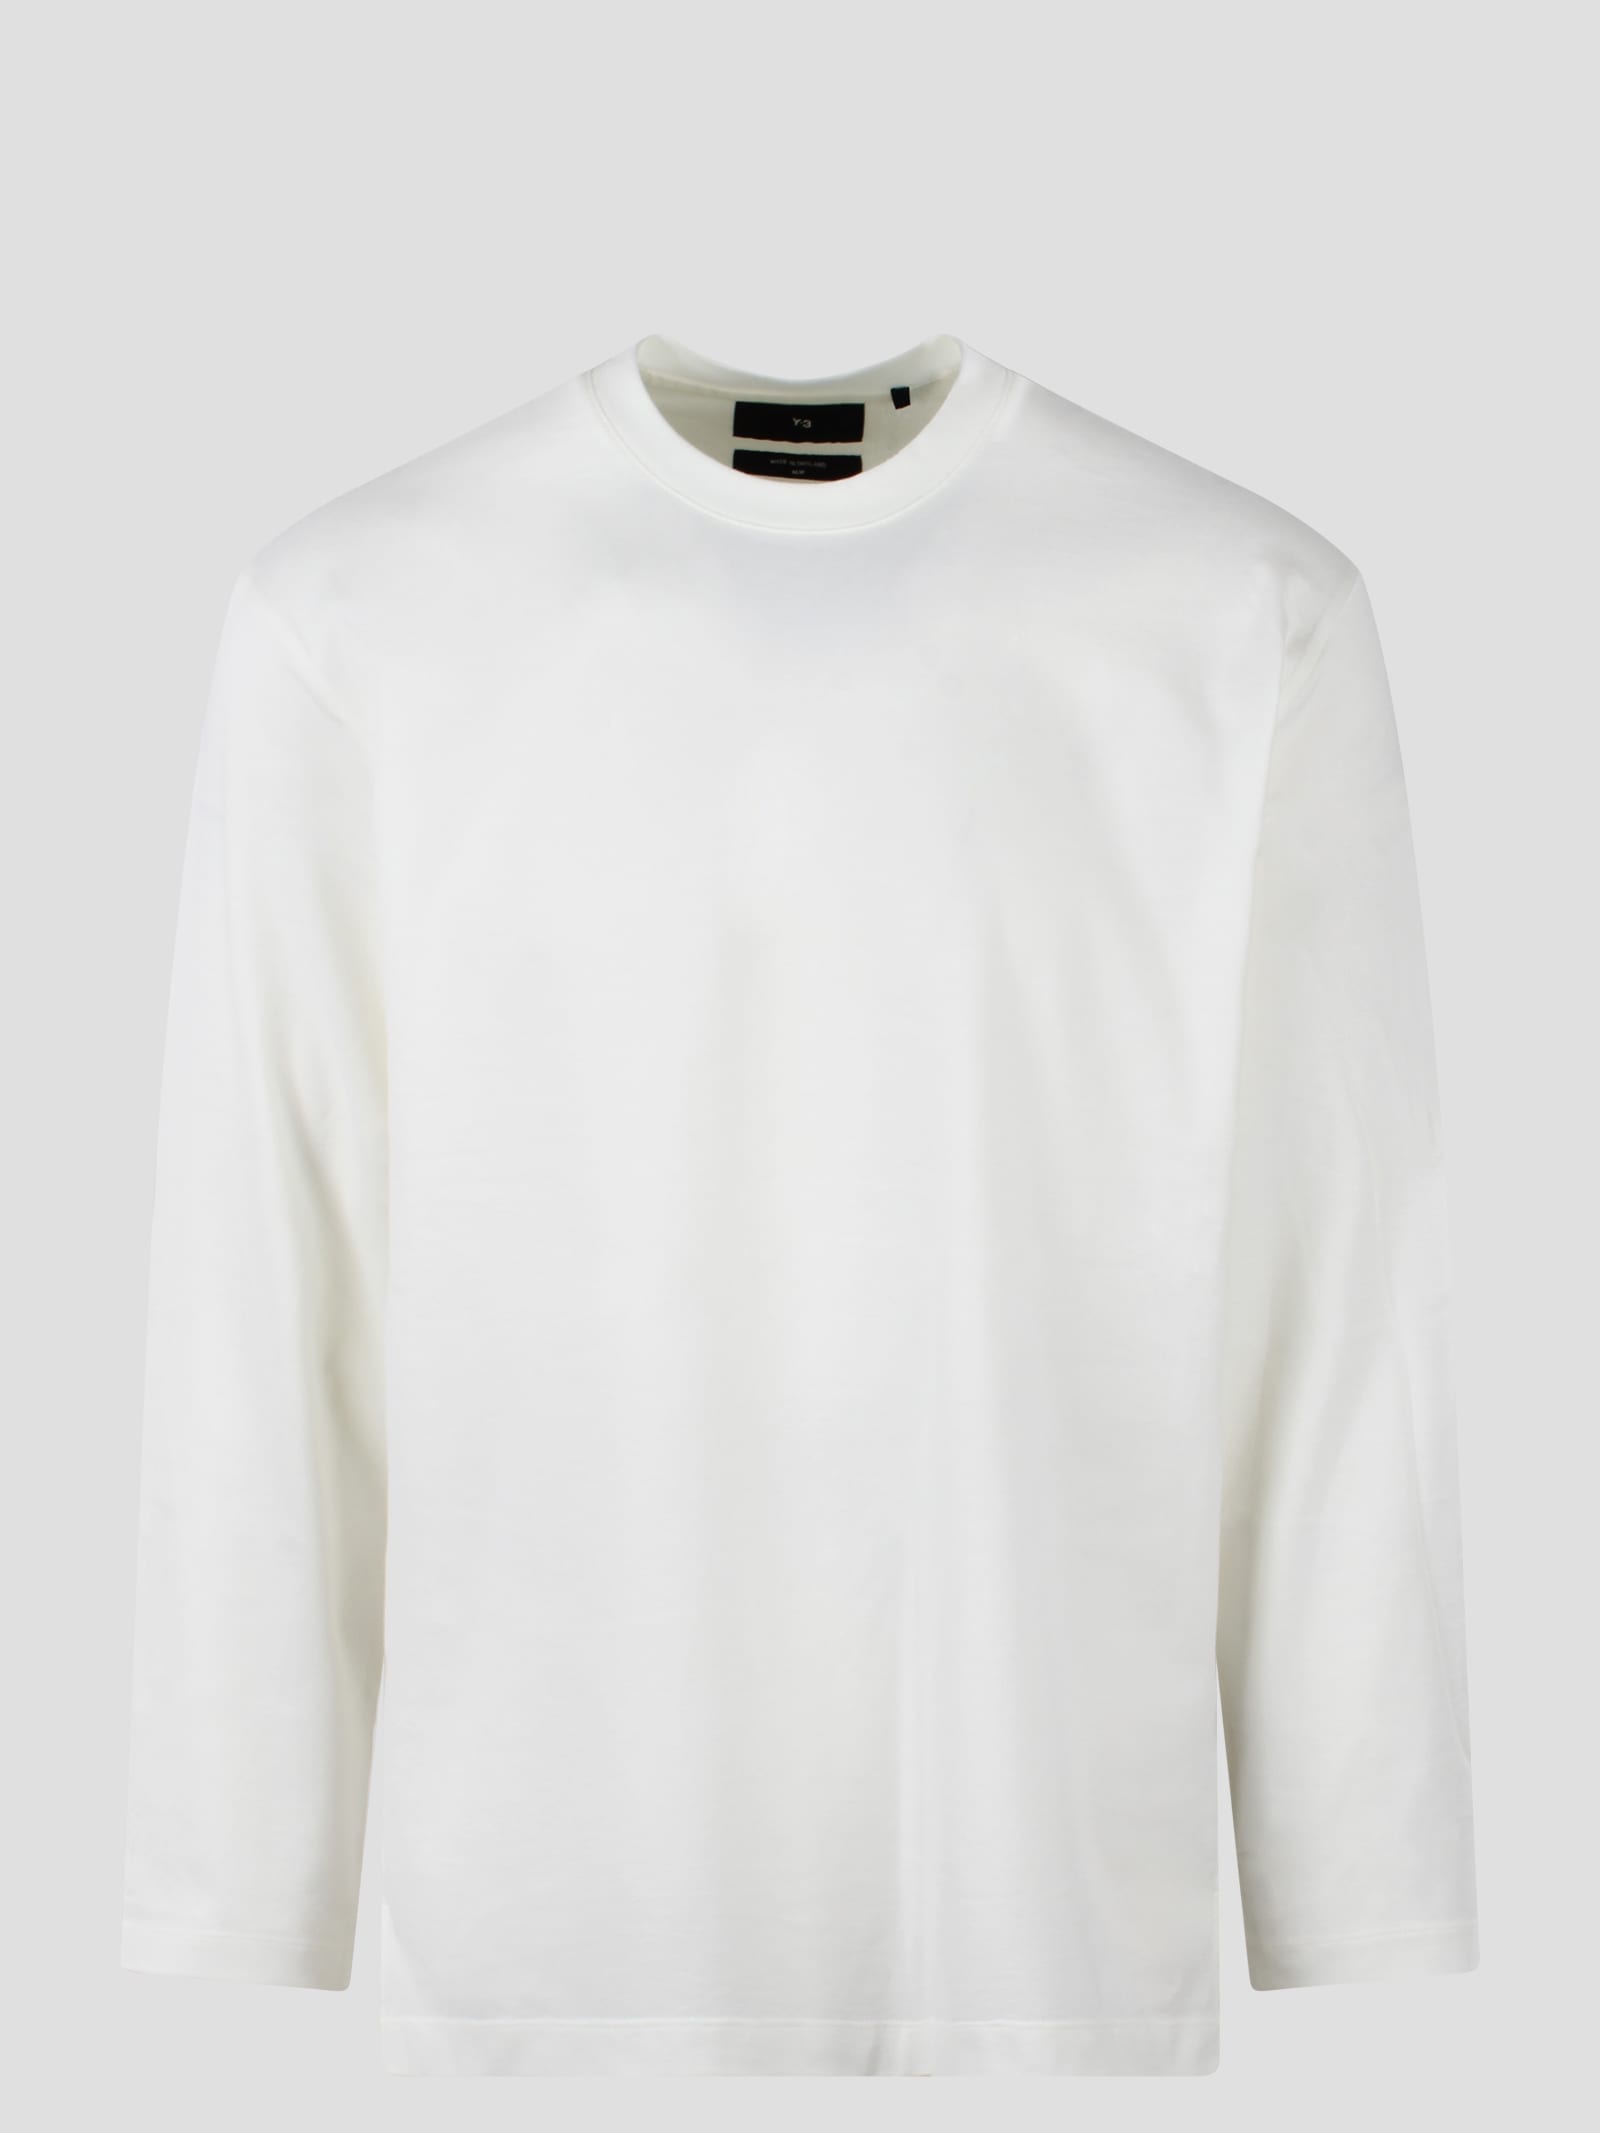 Y-3 Ls Tee In Off White